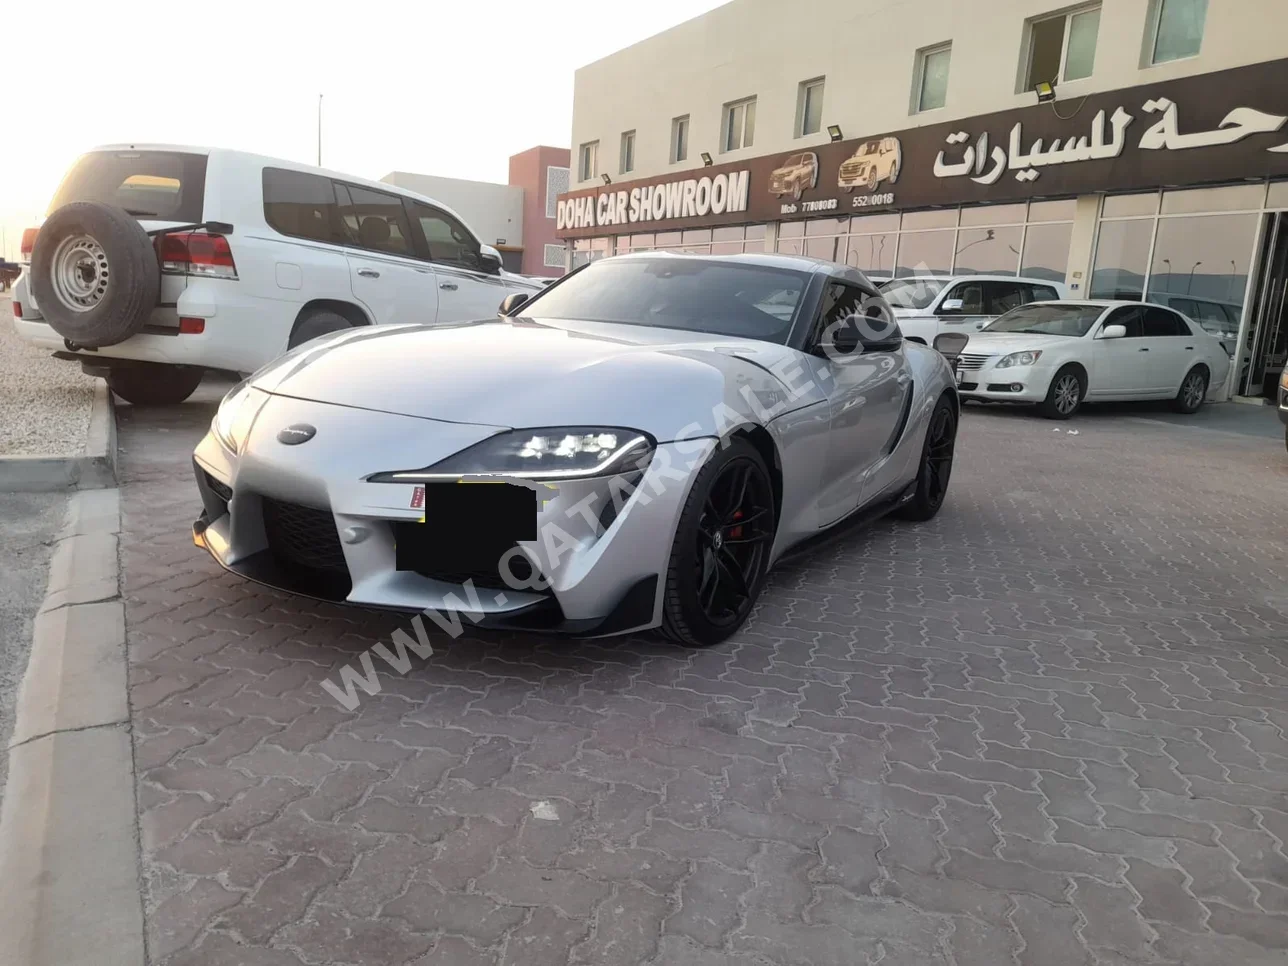 Toyota  Supra  GR  2020  Automatic  57,000 Km  6 Cylinder  Rear Wheel Drive (RWD)  Coupe / Sport  Silver